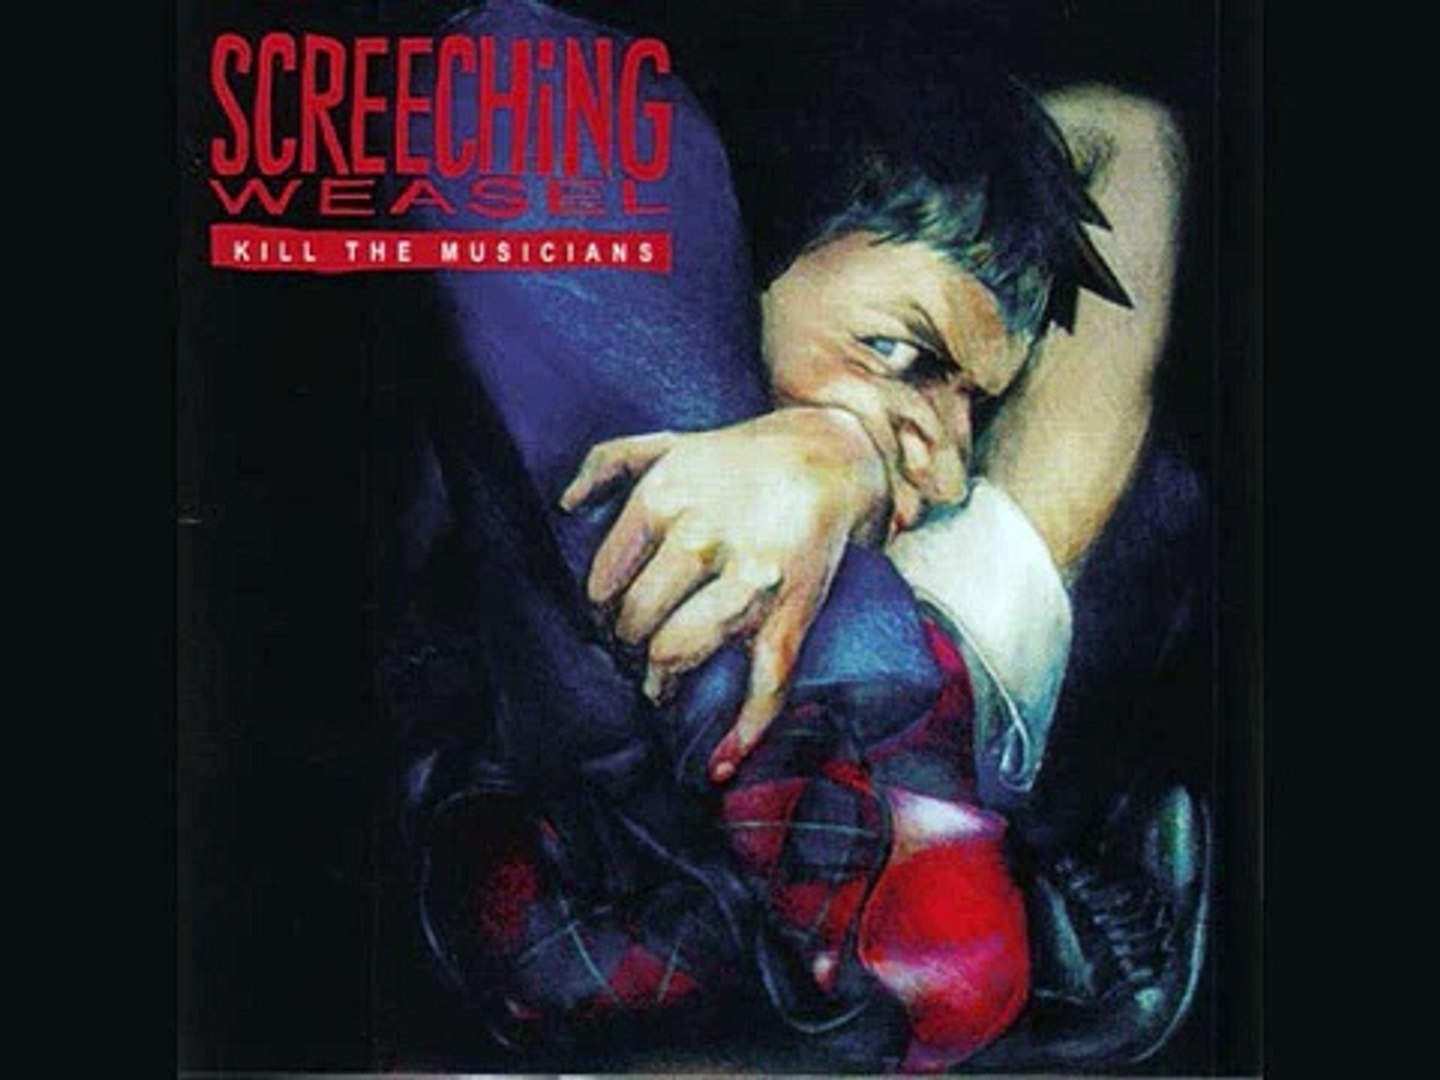 25 Screeching Weasel - Mary Was An ANarchist